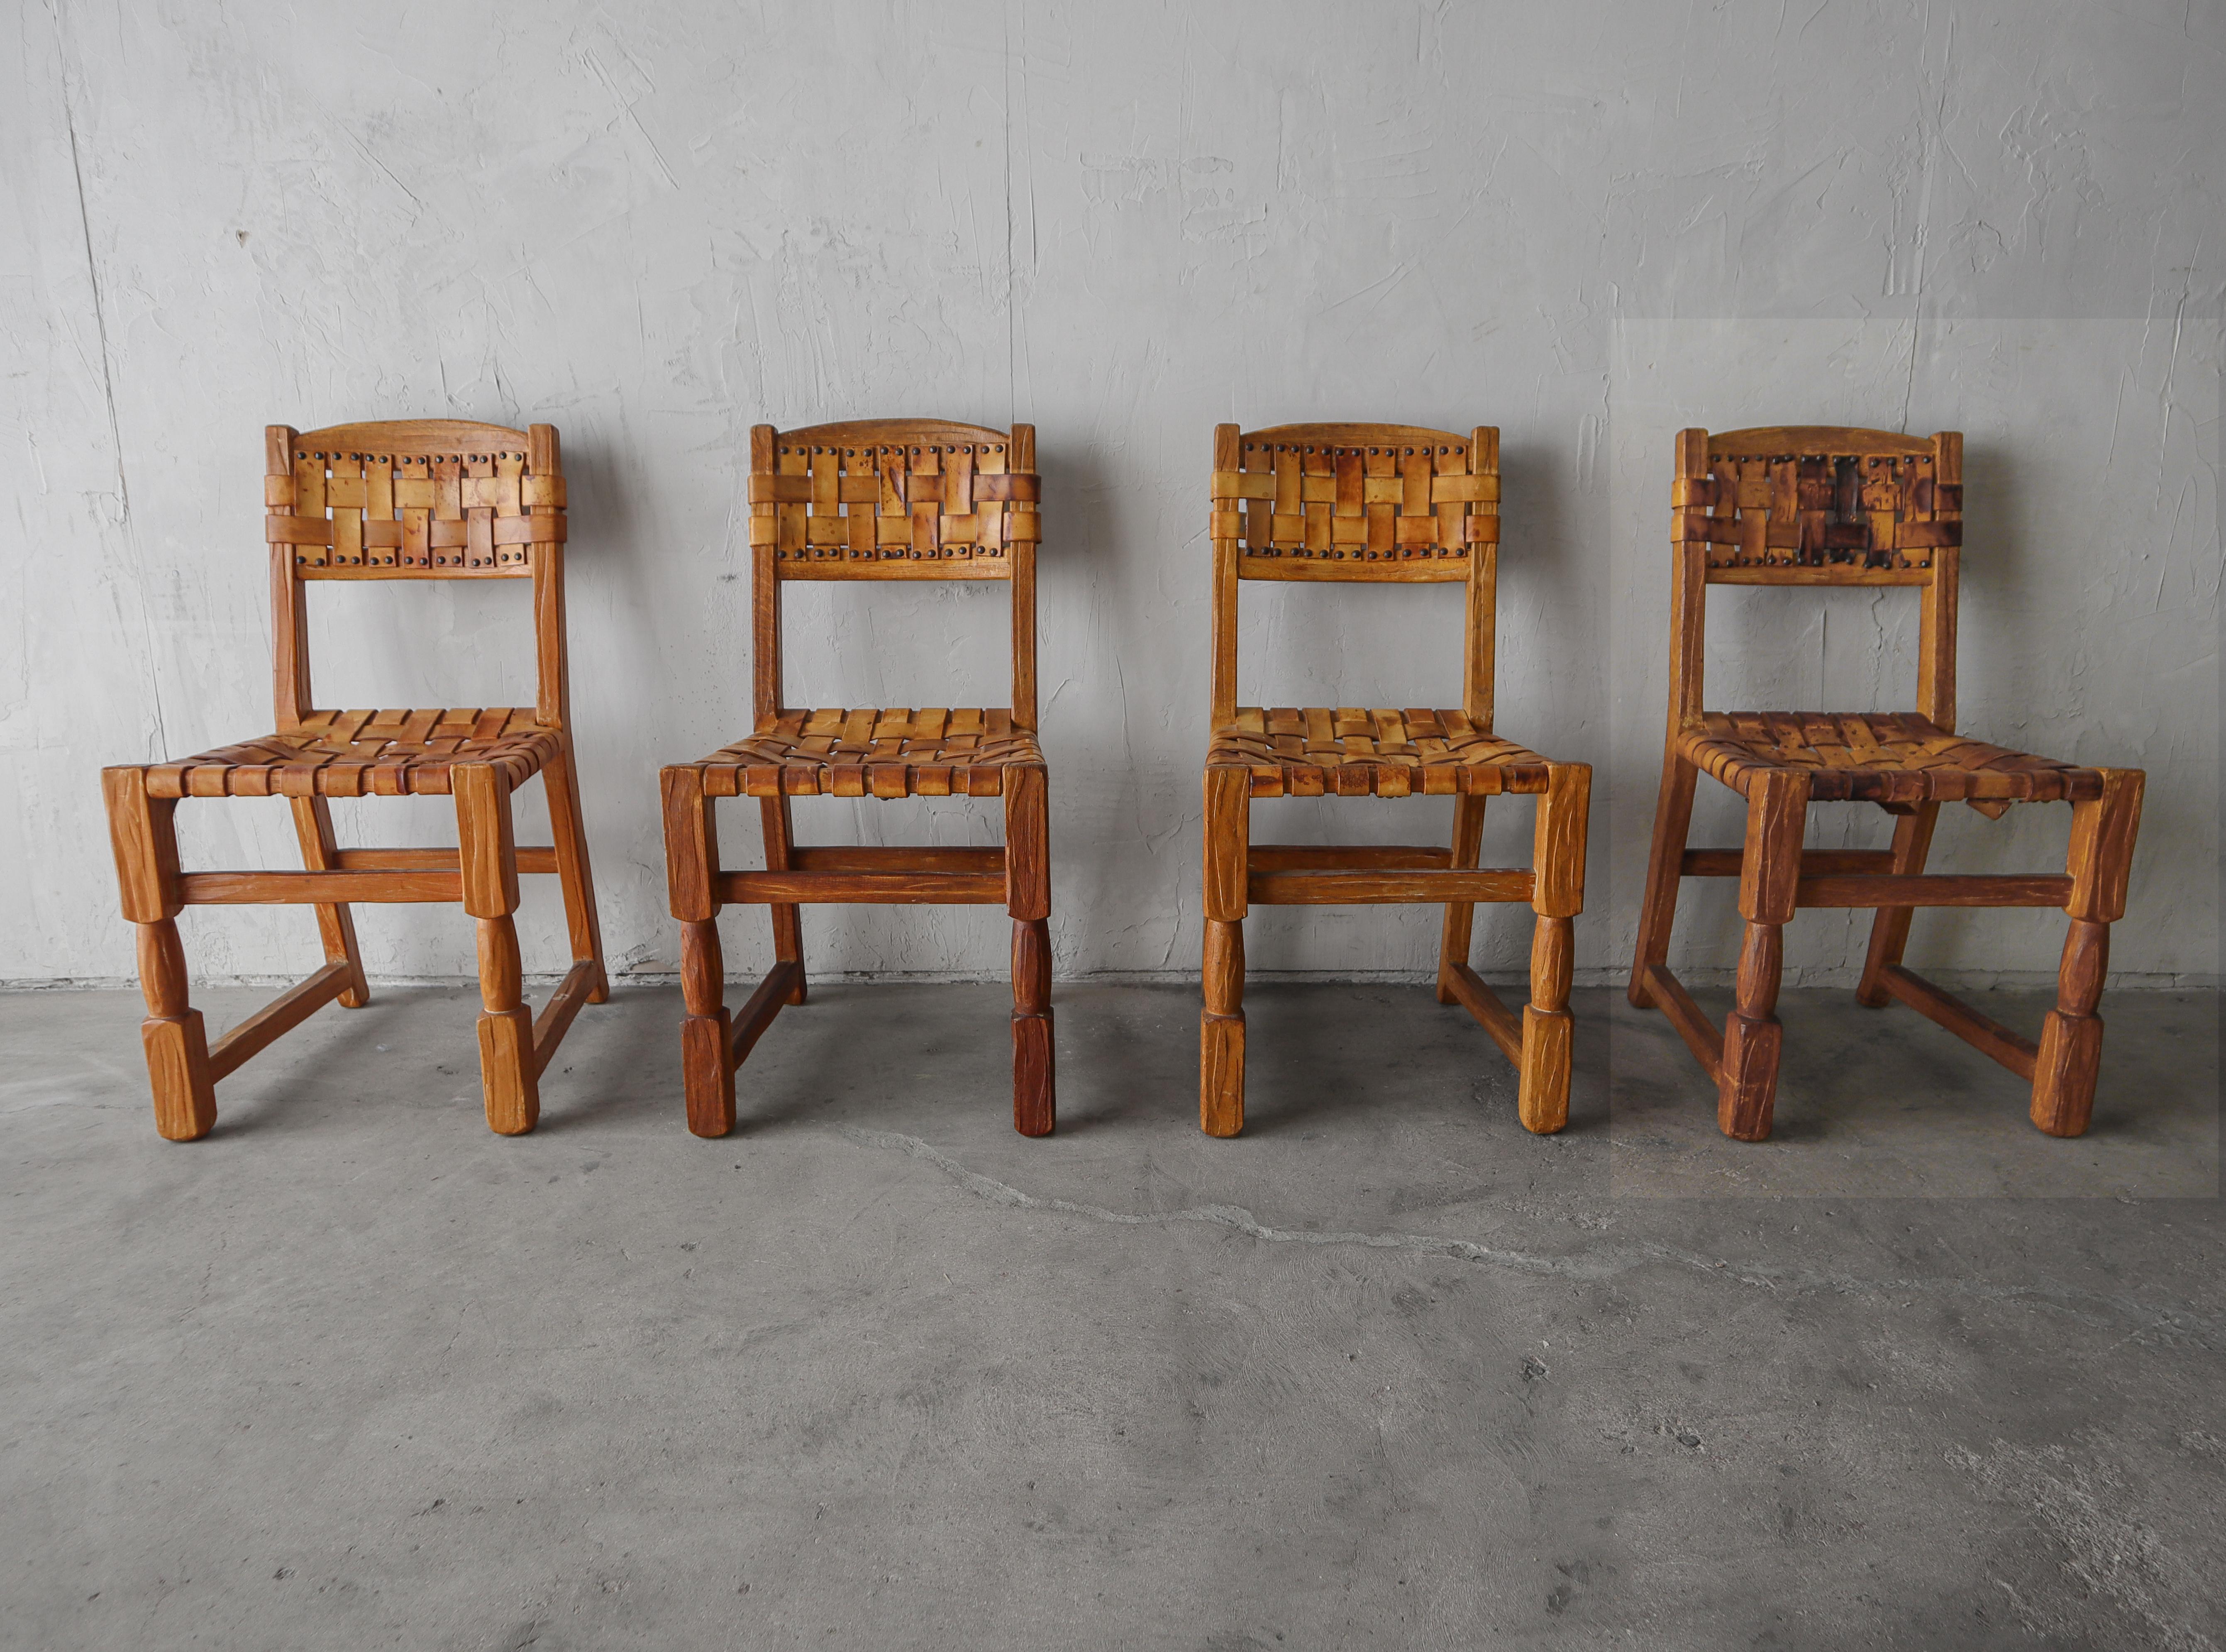 Set of four, perfectly patinated, woven leather, oak frame dining chairs.  

Chairs have beautifully worn leather for that great Industrial look, lots of patina but still 100% useable. Oak frames are structurally sound.  They have a perfect wabisabi